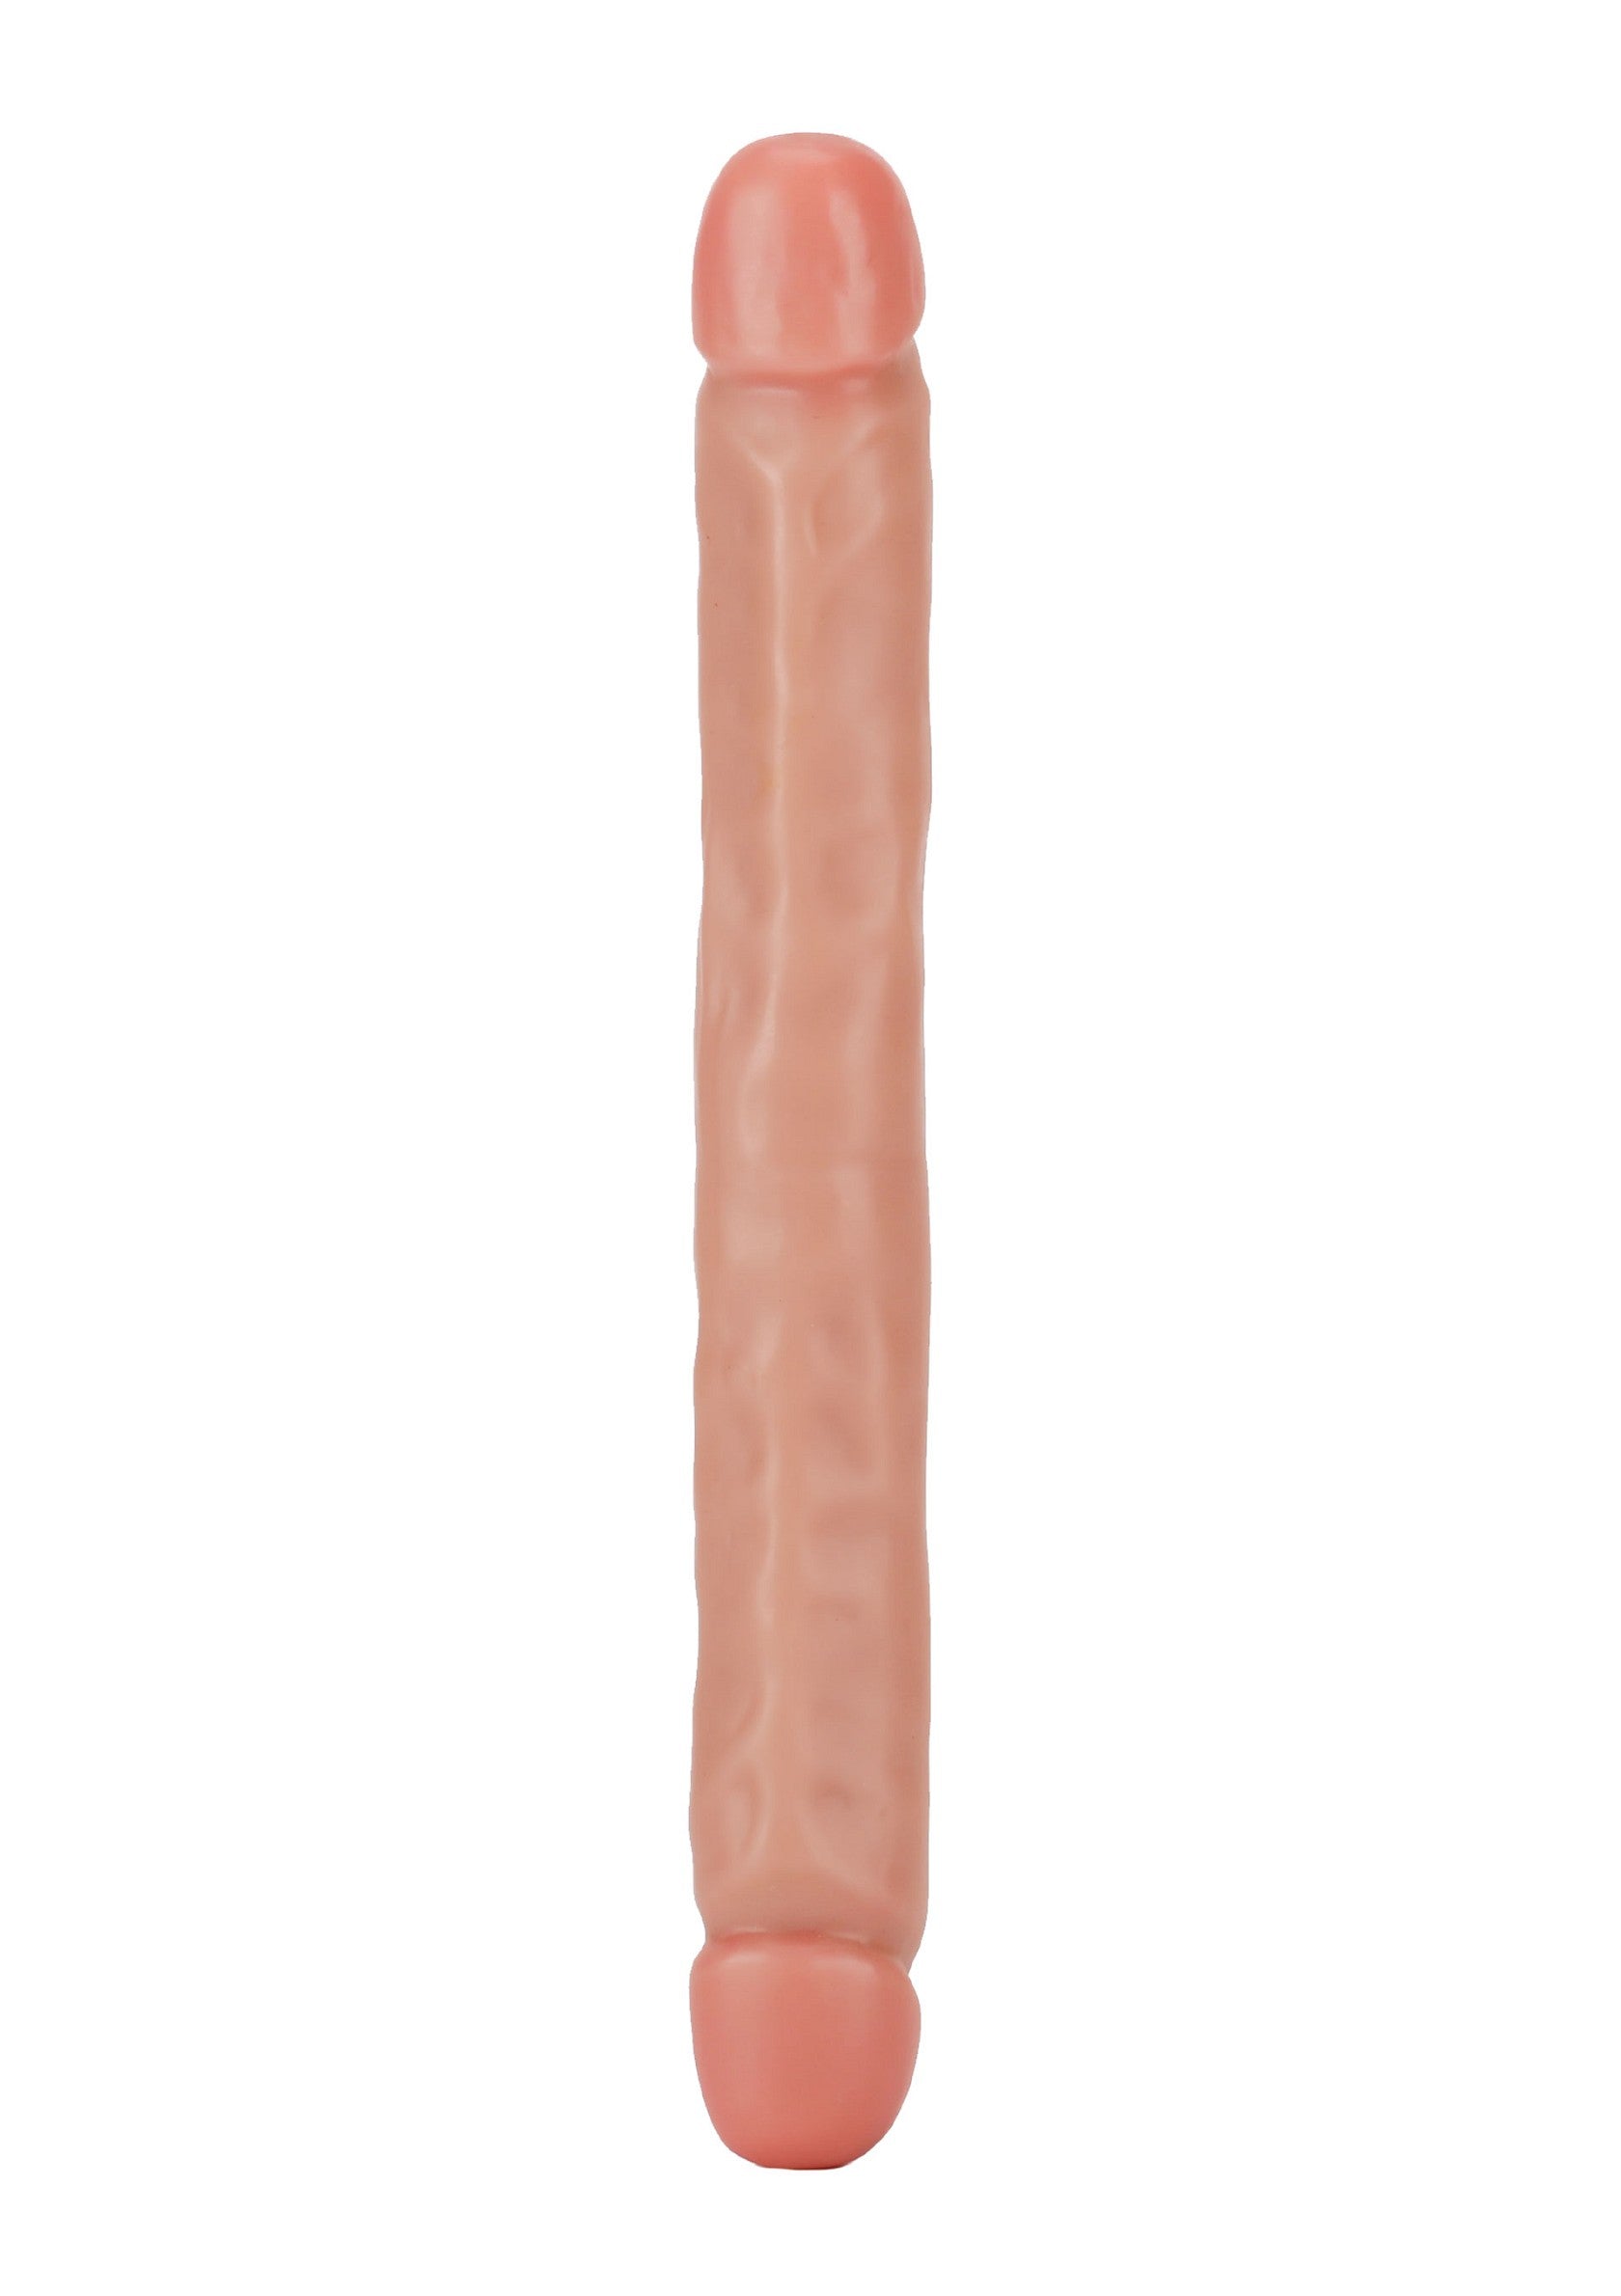 ToyJoy Get Real Junior Double Dong 12' SKIN - 0